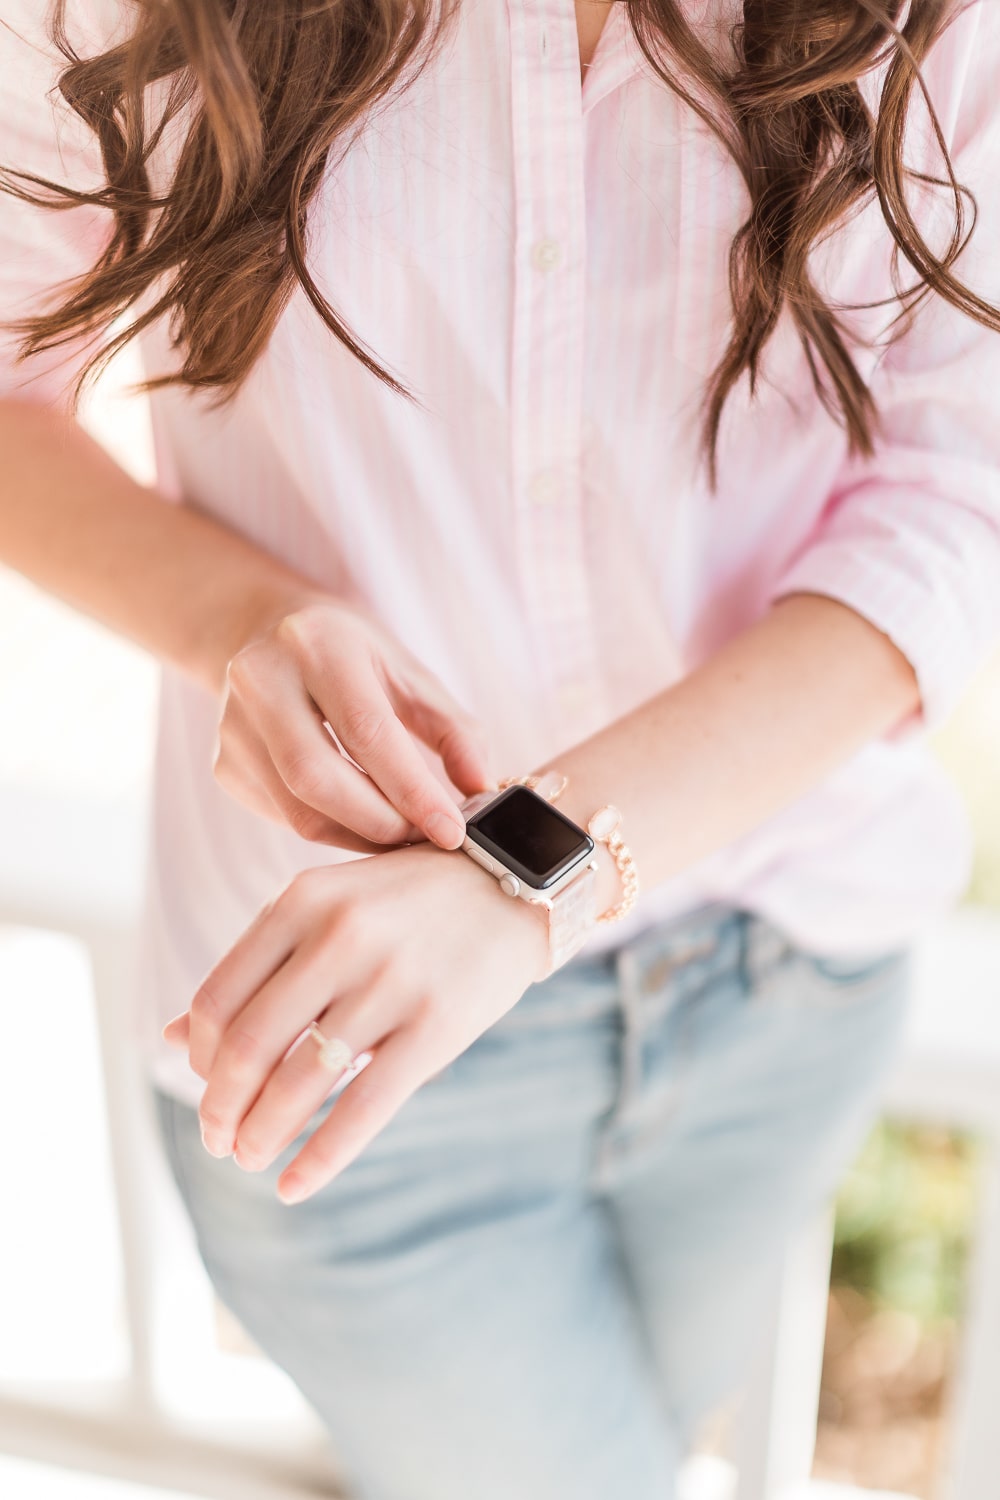 Amazon Apple Watch band styled with Kendra Scott Macrame Elton Rose Gold Cuff Bracelet In Blush Wood by fashion blogger Stephanie Ziajka of Diary of a Debutante